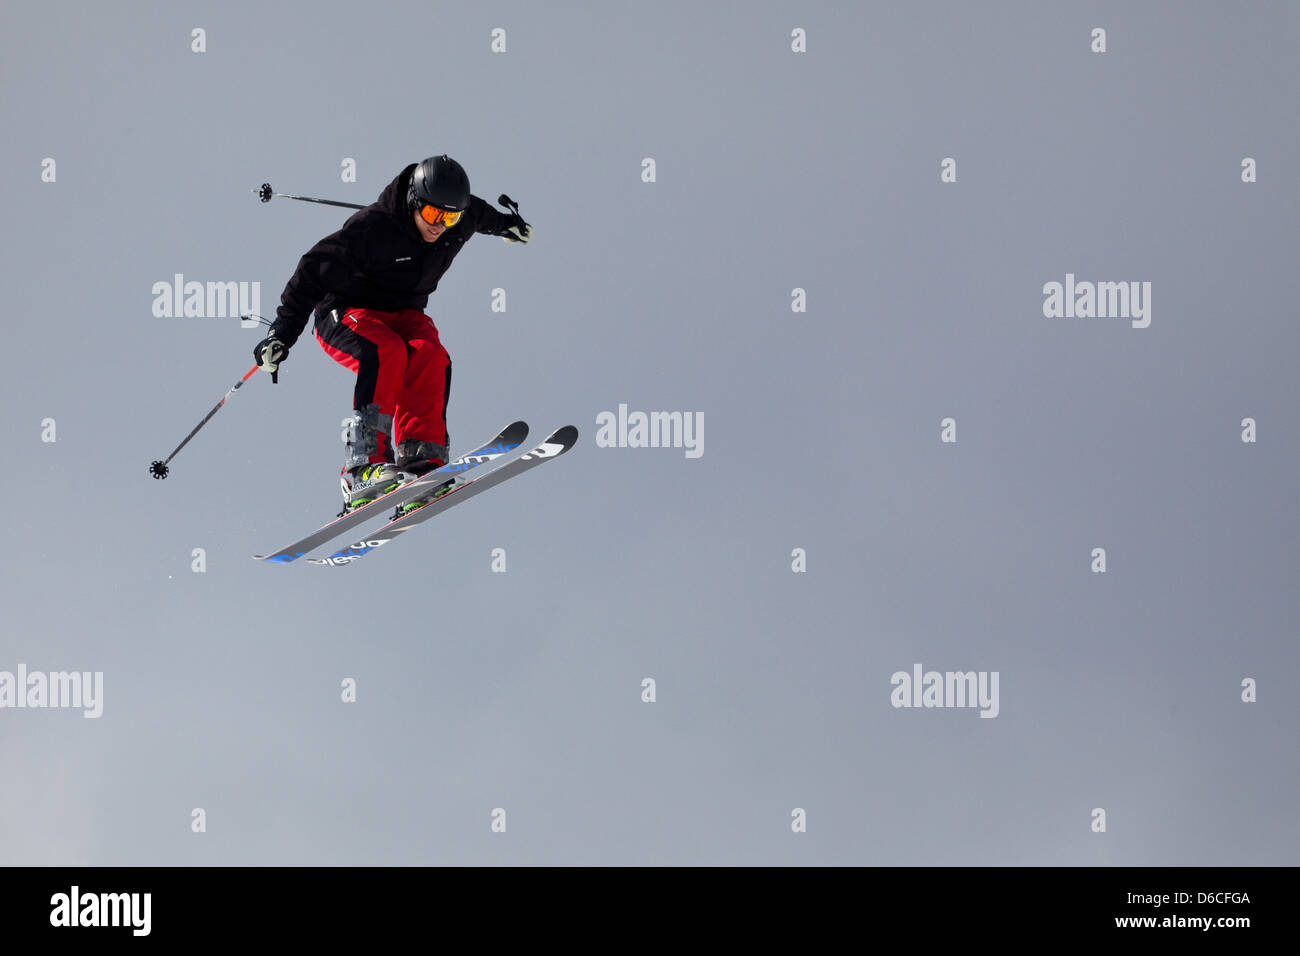 A skier makes a jump at Red Mountain resort, Canada Stock Photo